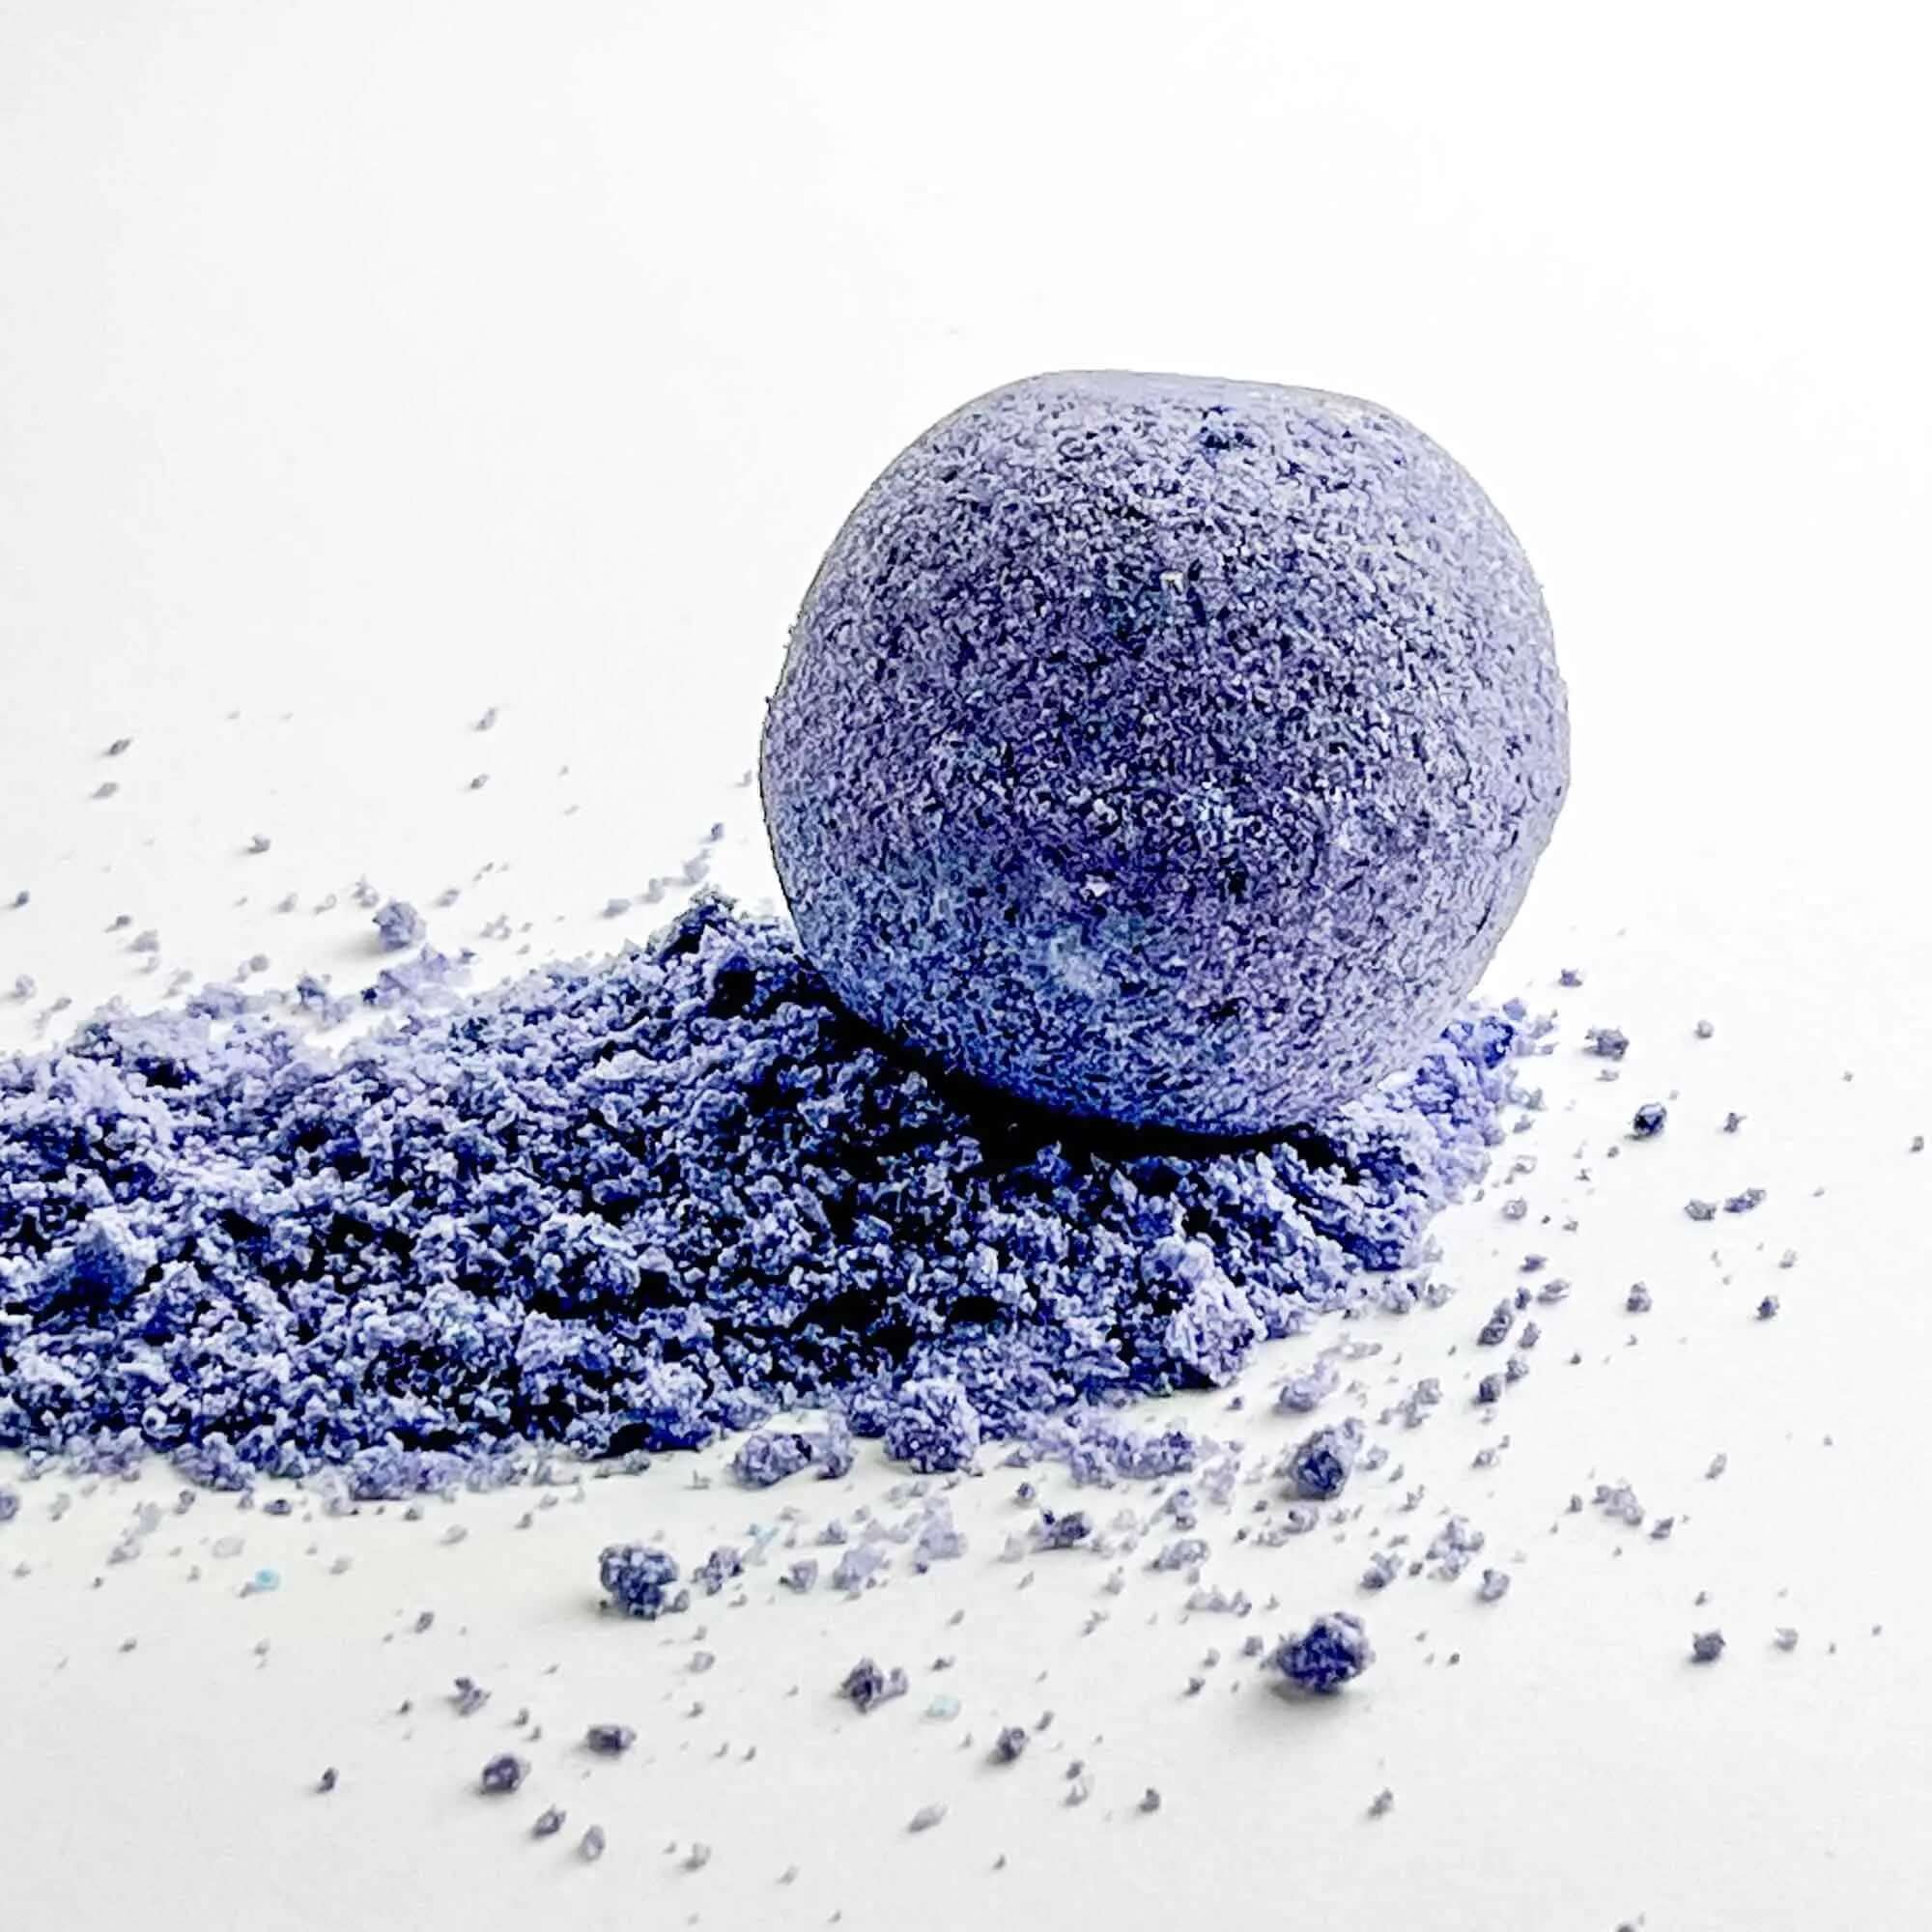 Luxurious Lavender Sage Bath Bomb - All-Natural Relaxation